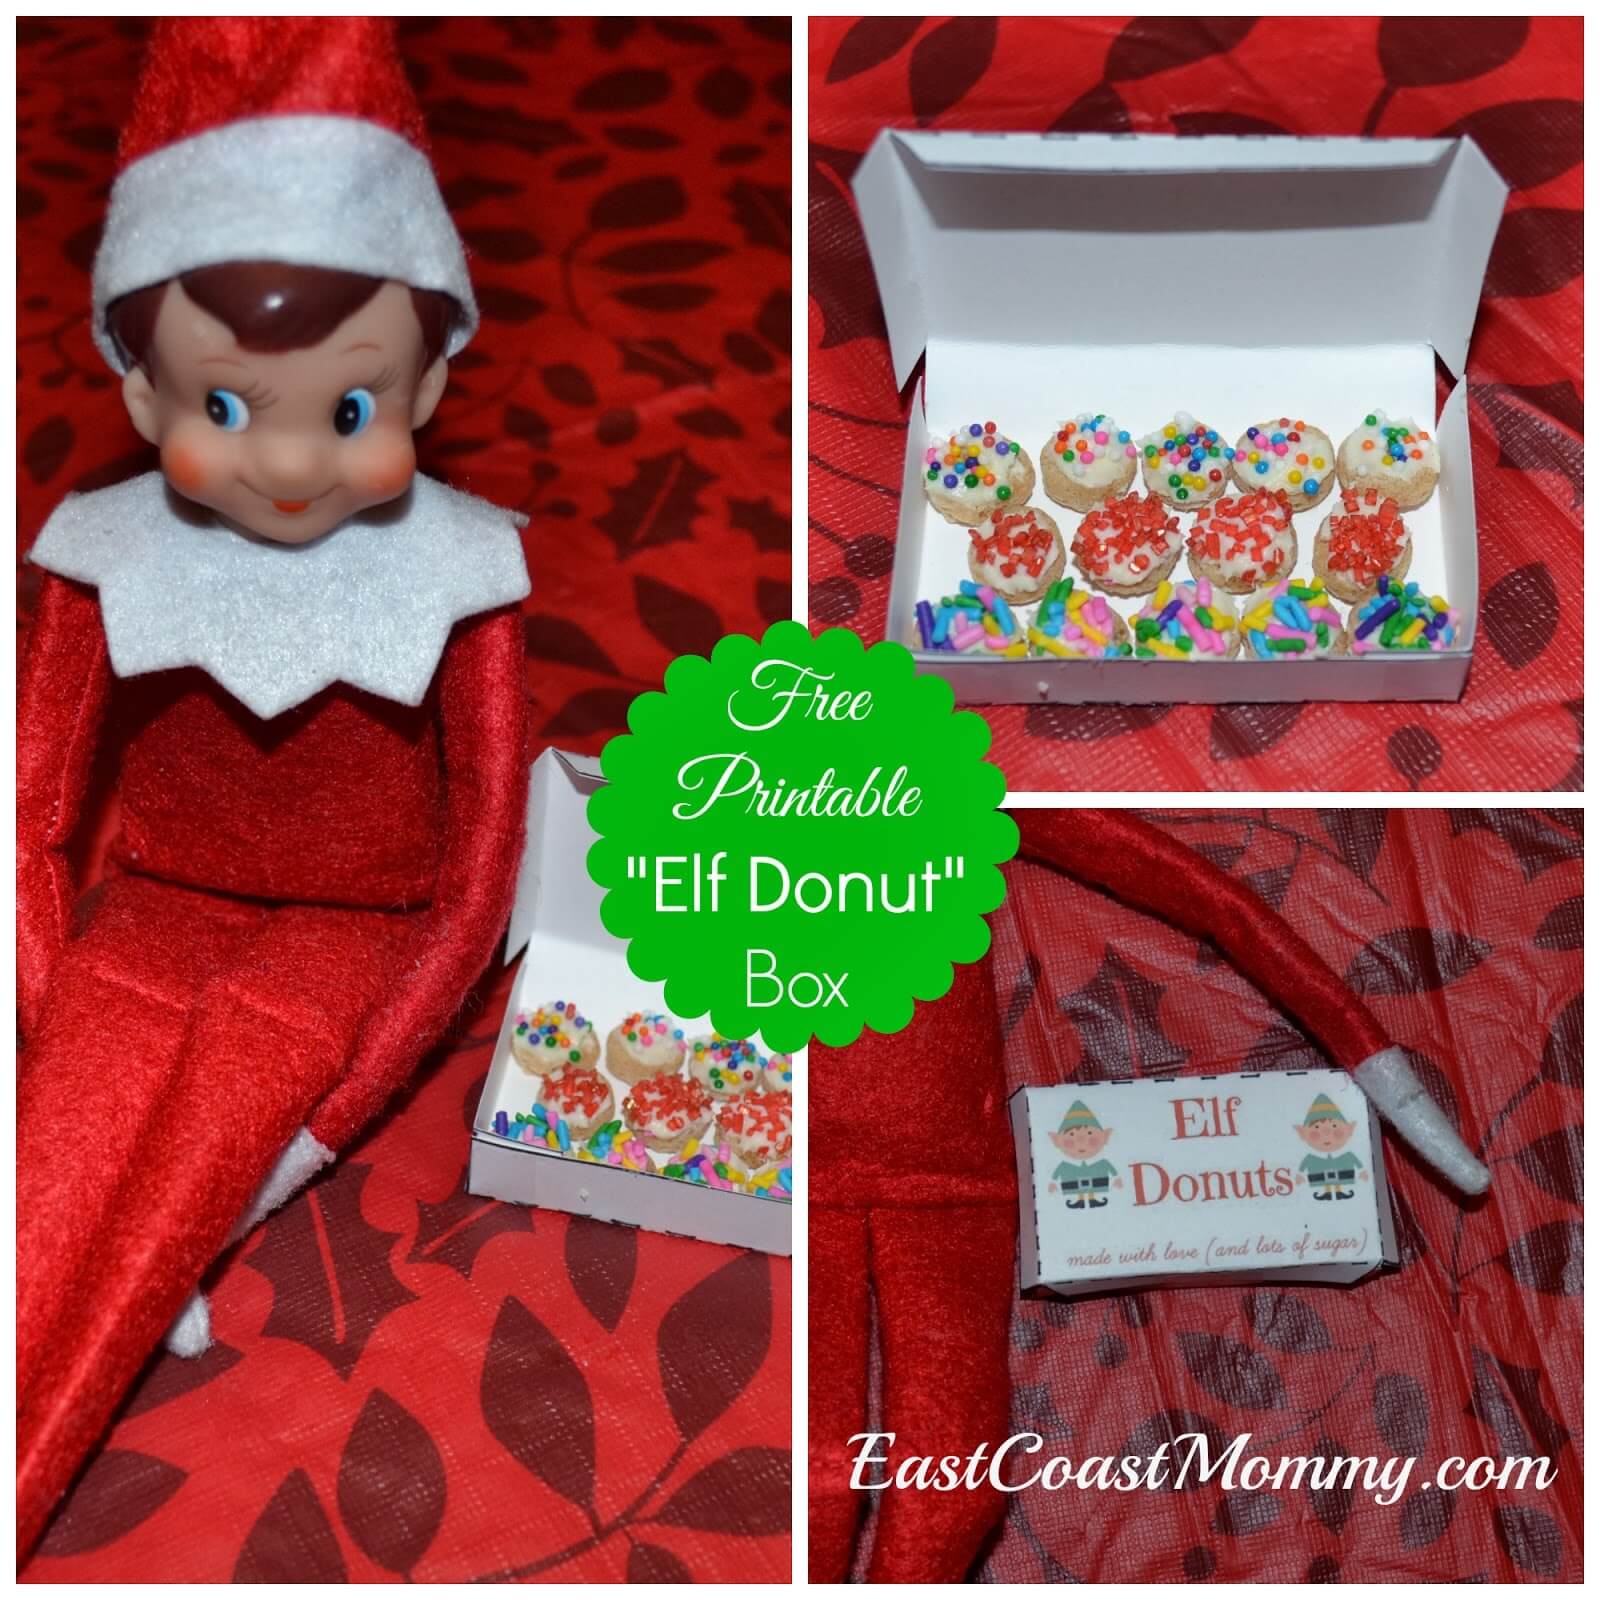 Elf on the Shelf with box of pretend donuts